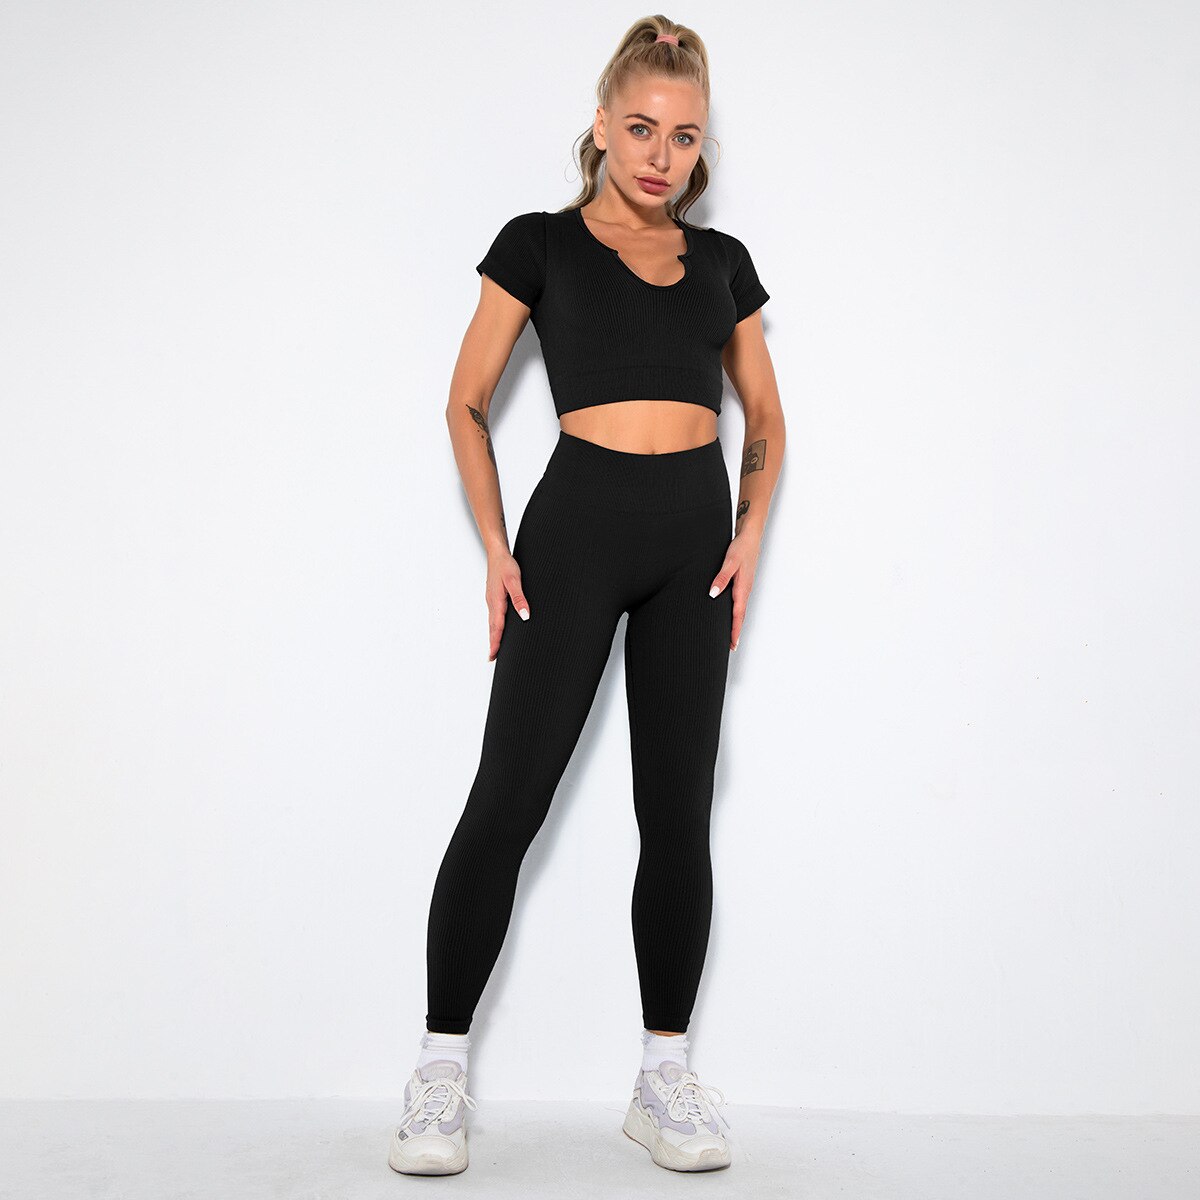 Seamless Yoga Set 2/3/4 Piece Gym Set Women Ribbed Crop Top Shorts Suits Fitness Sports Bra Leggings Running Outfits Tracksuit v2